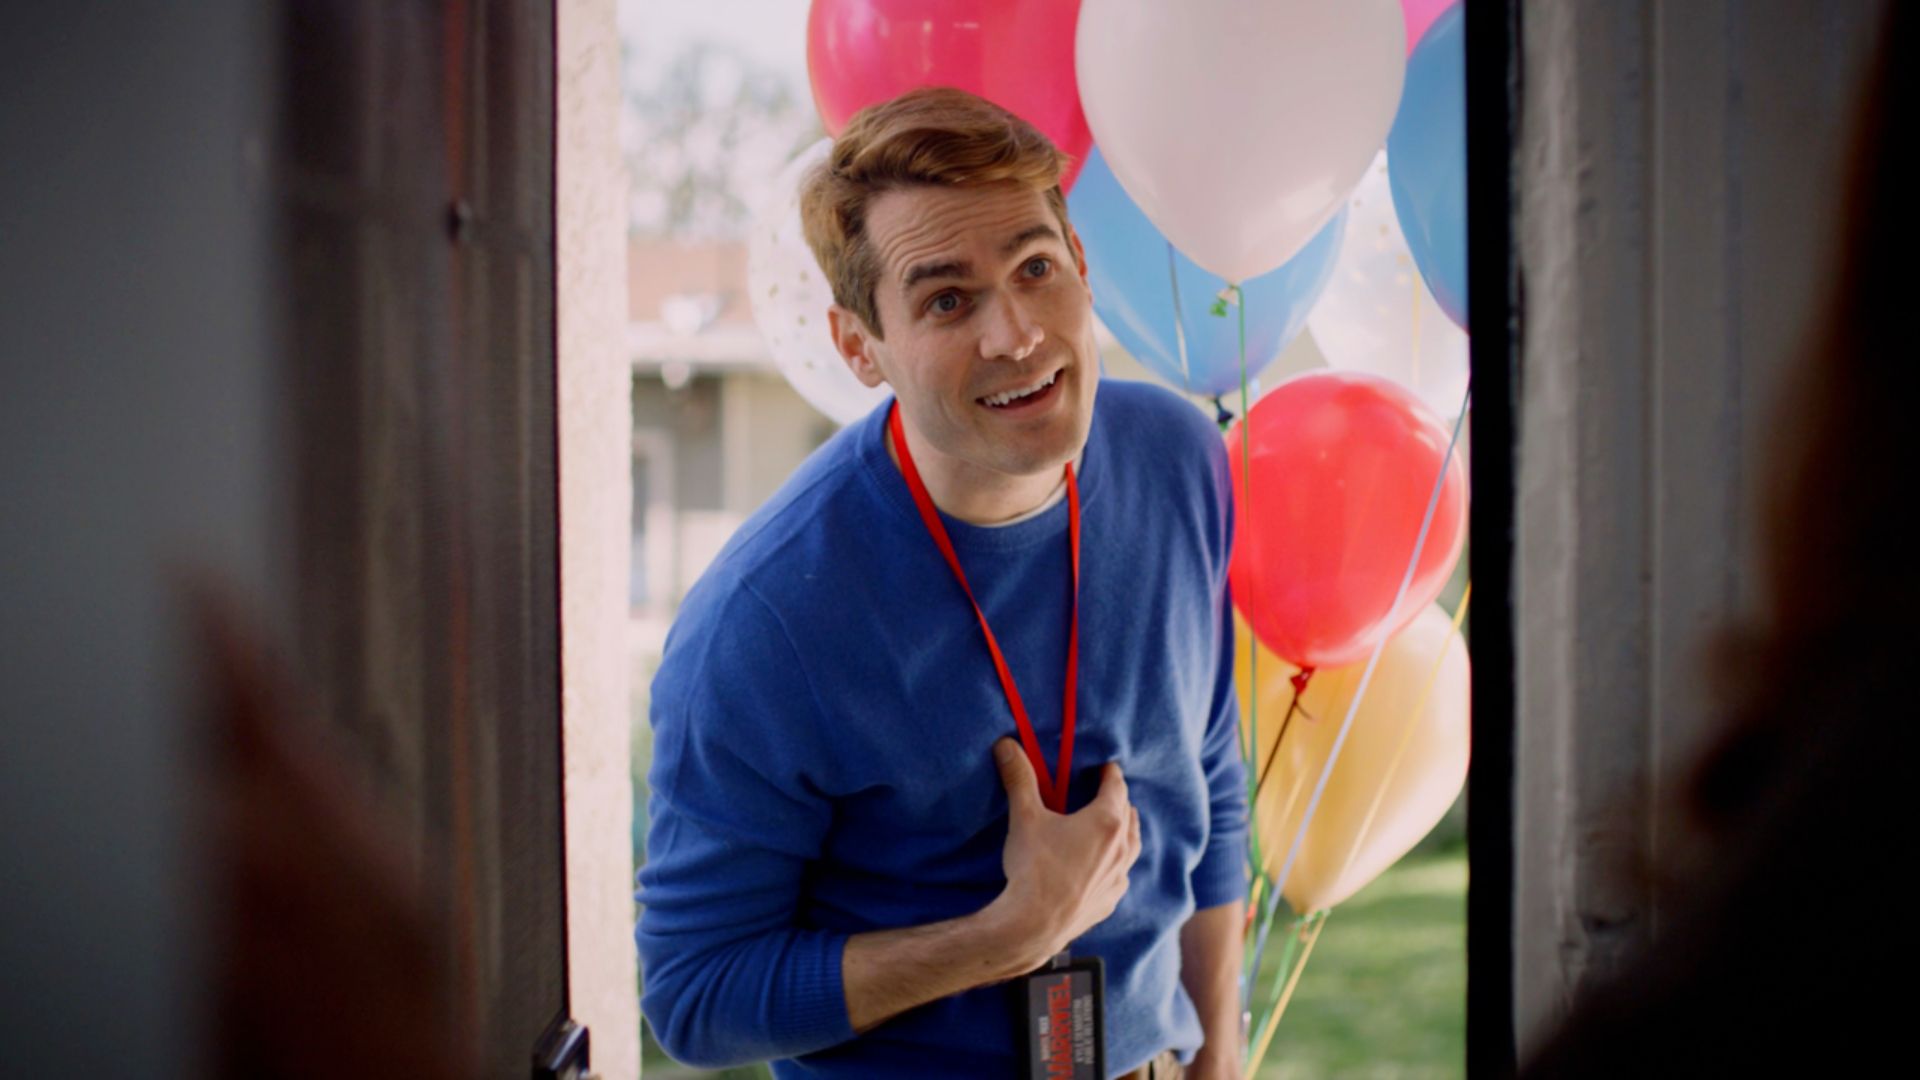 Jim Cummings with balloons in the short film Is Now a Good Time